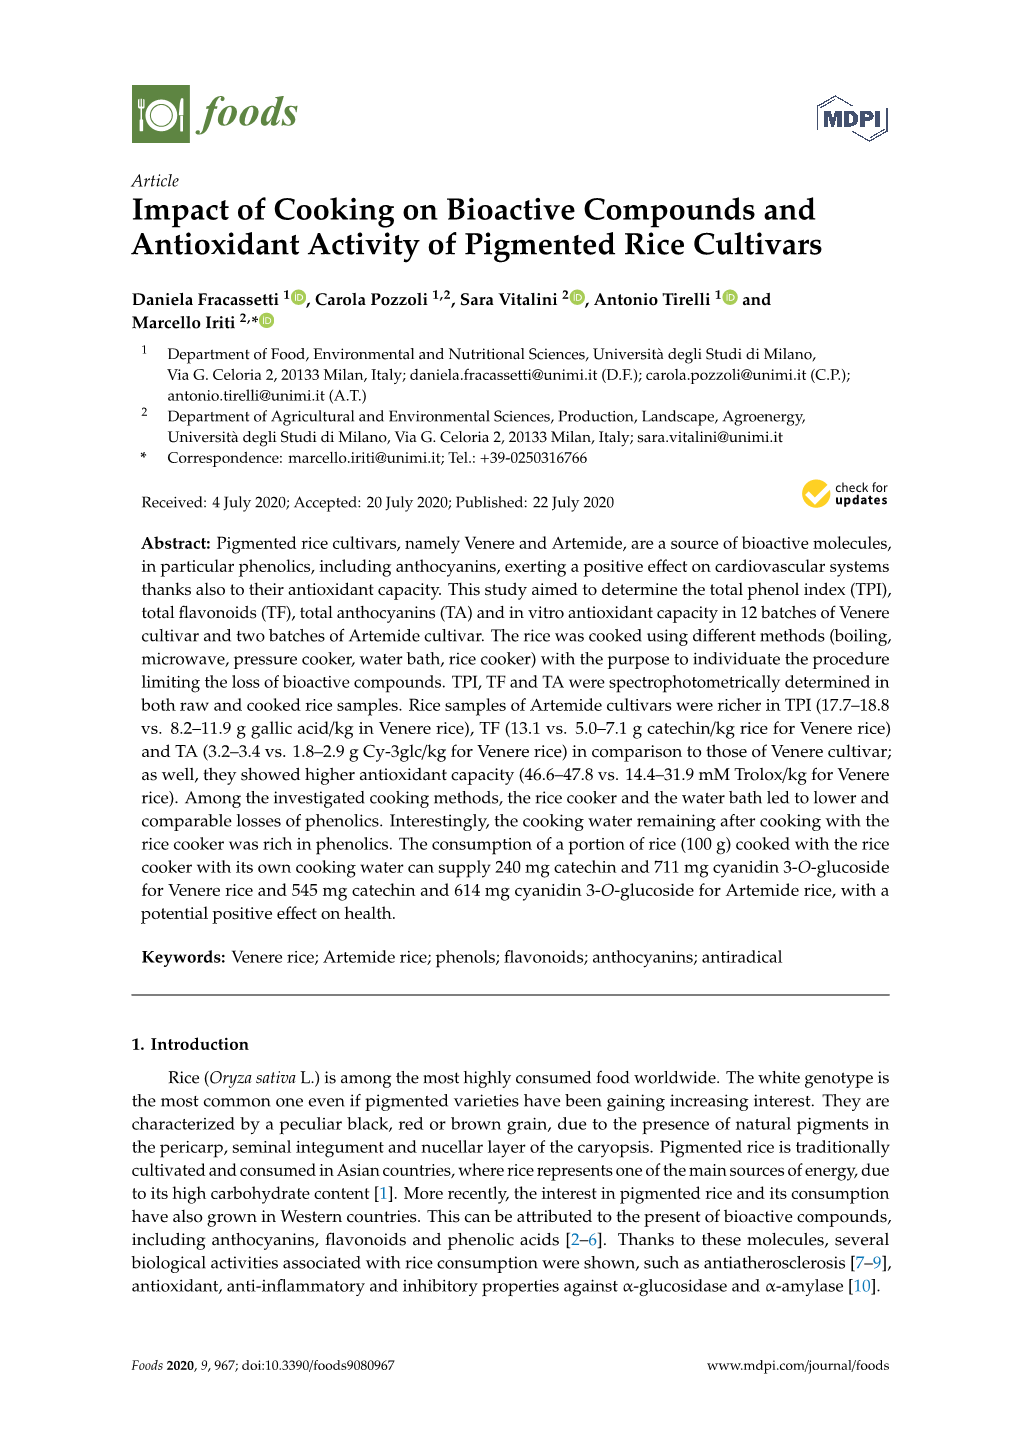 Impact of Cooking on Bioactive Compounds and Antioxidant Activity of Pigmented Rice Cultivars